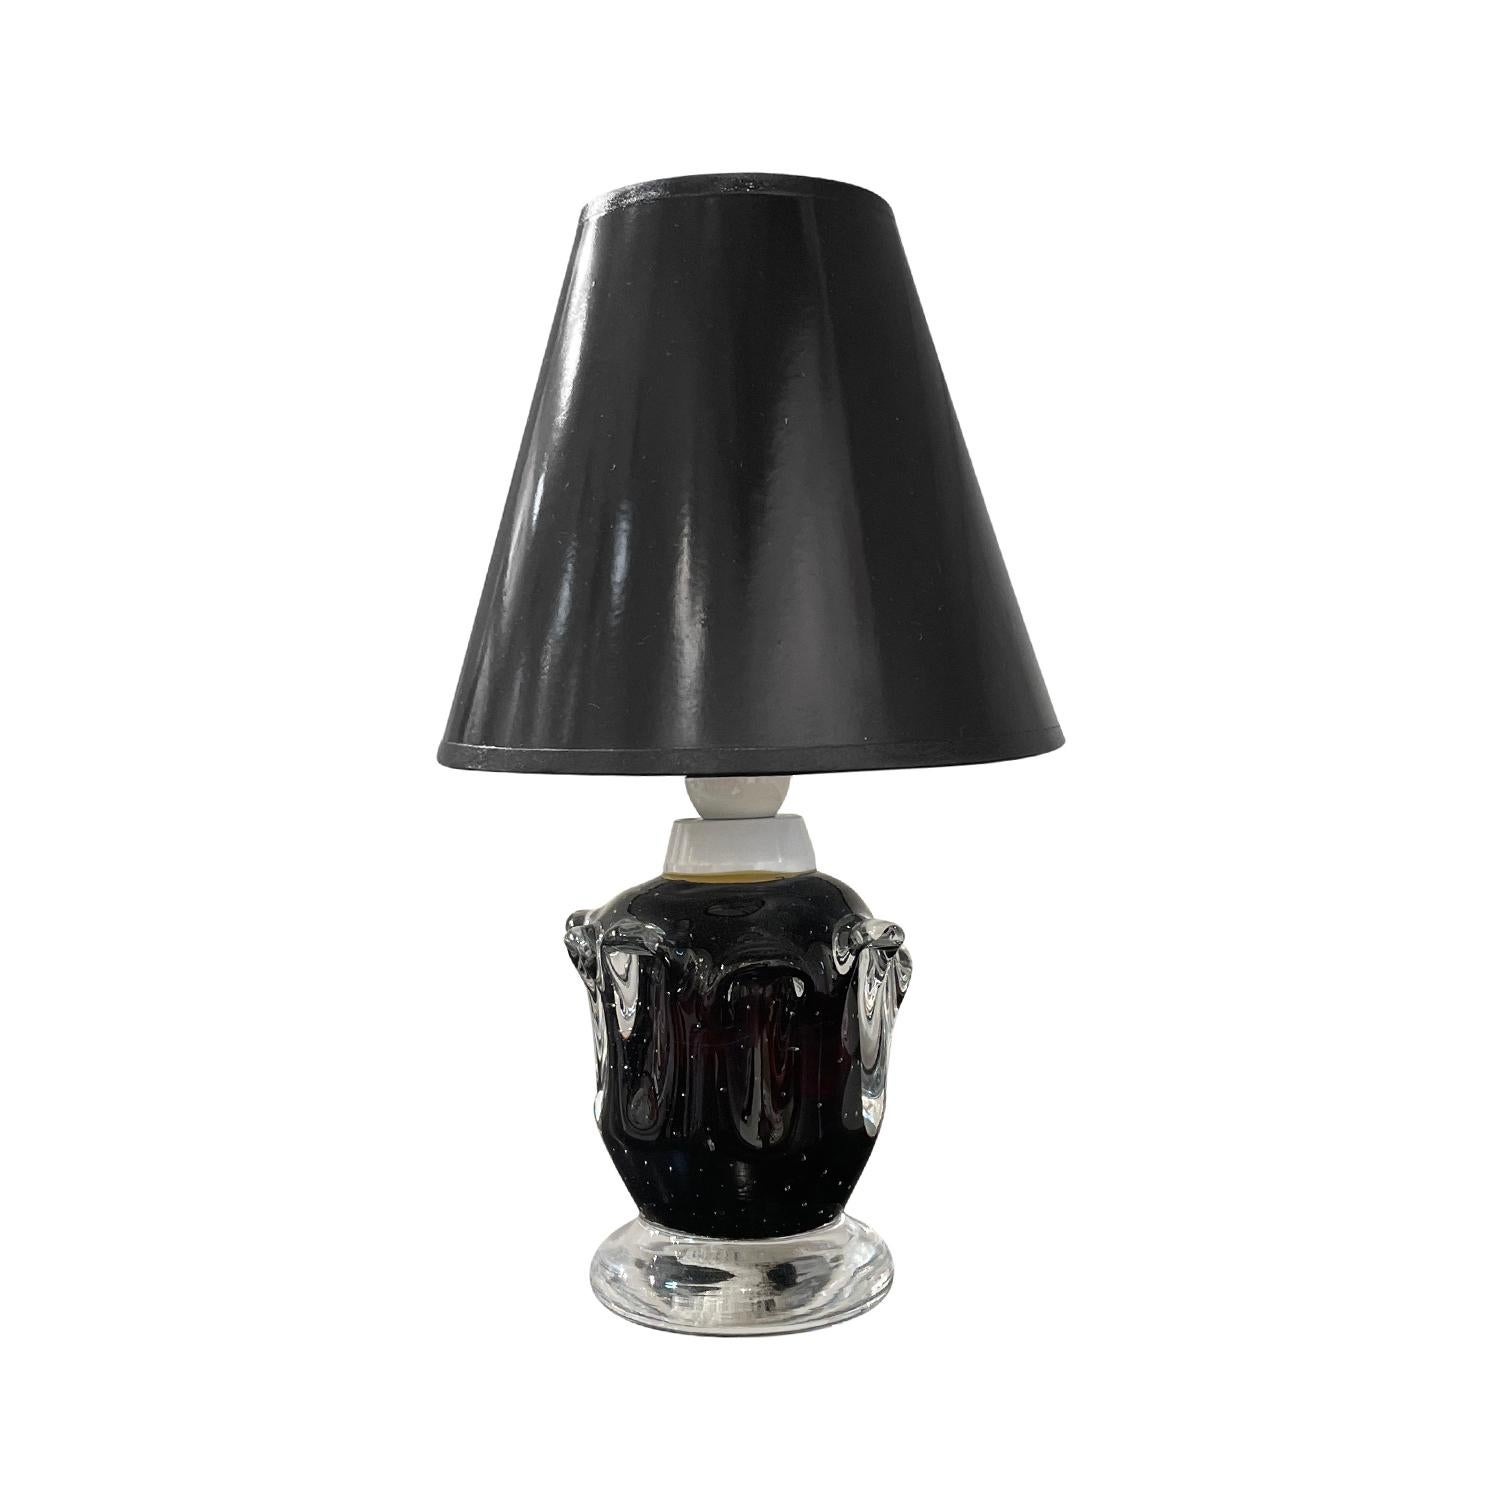 A sculptural, vintage Mid-Century Modern Swedish table lamp with a new black shade, made of hand blown Orrefors glass, featuring a one light socket in good condition. The small dark-brown, black undercoat Scandinavian desk light was designed,